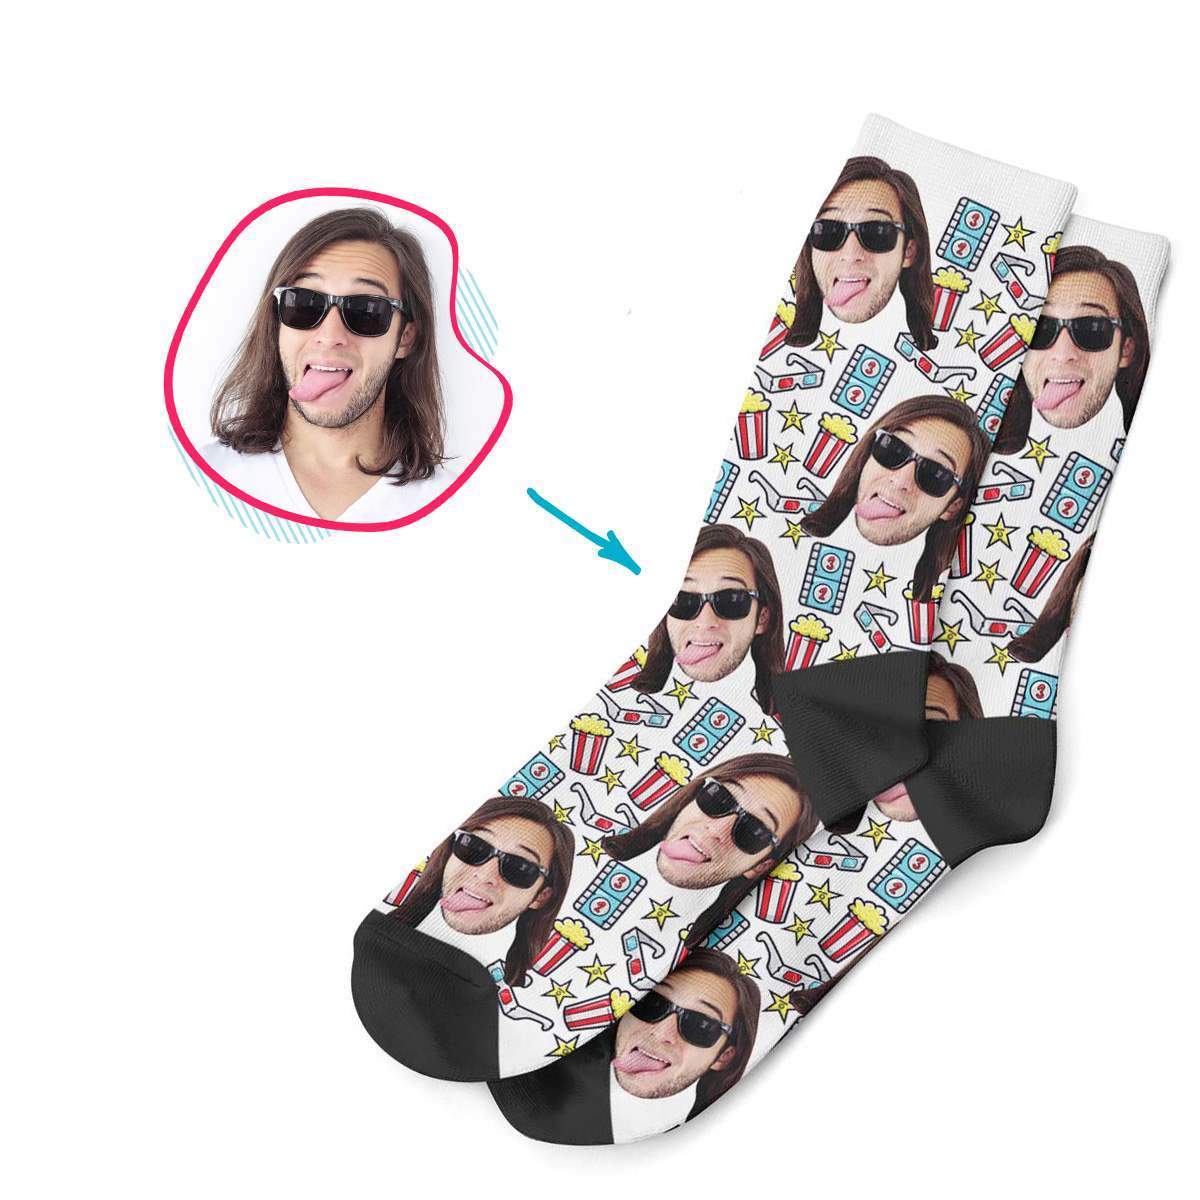 white Movie socks personalized with photo of face printed on them